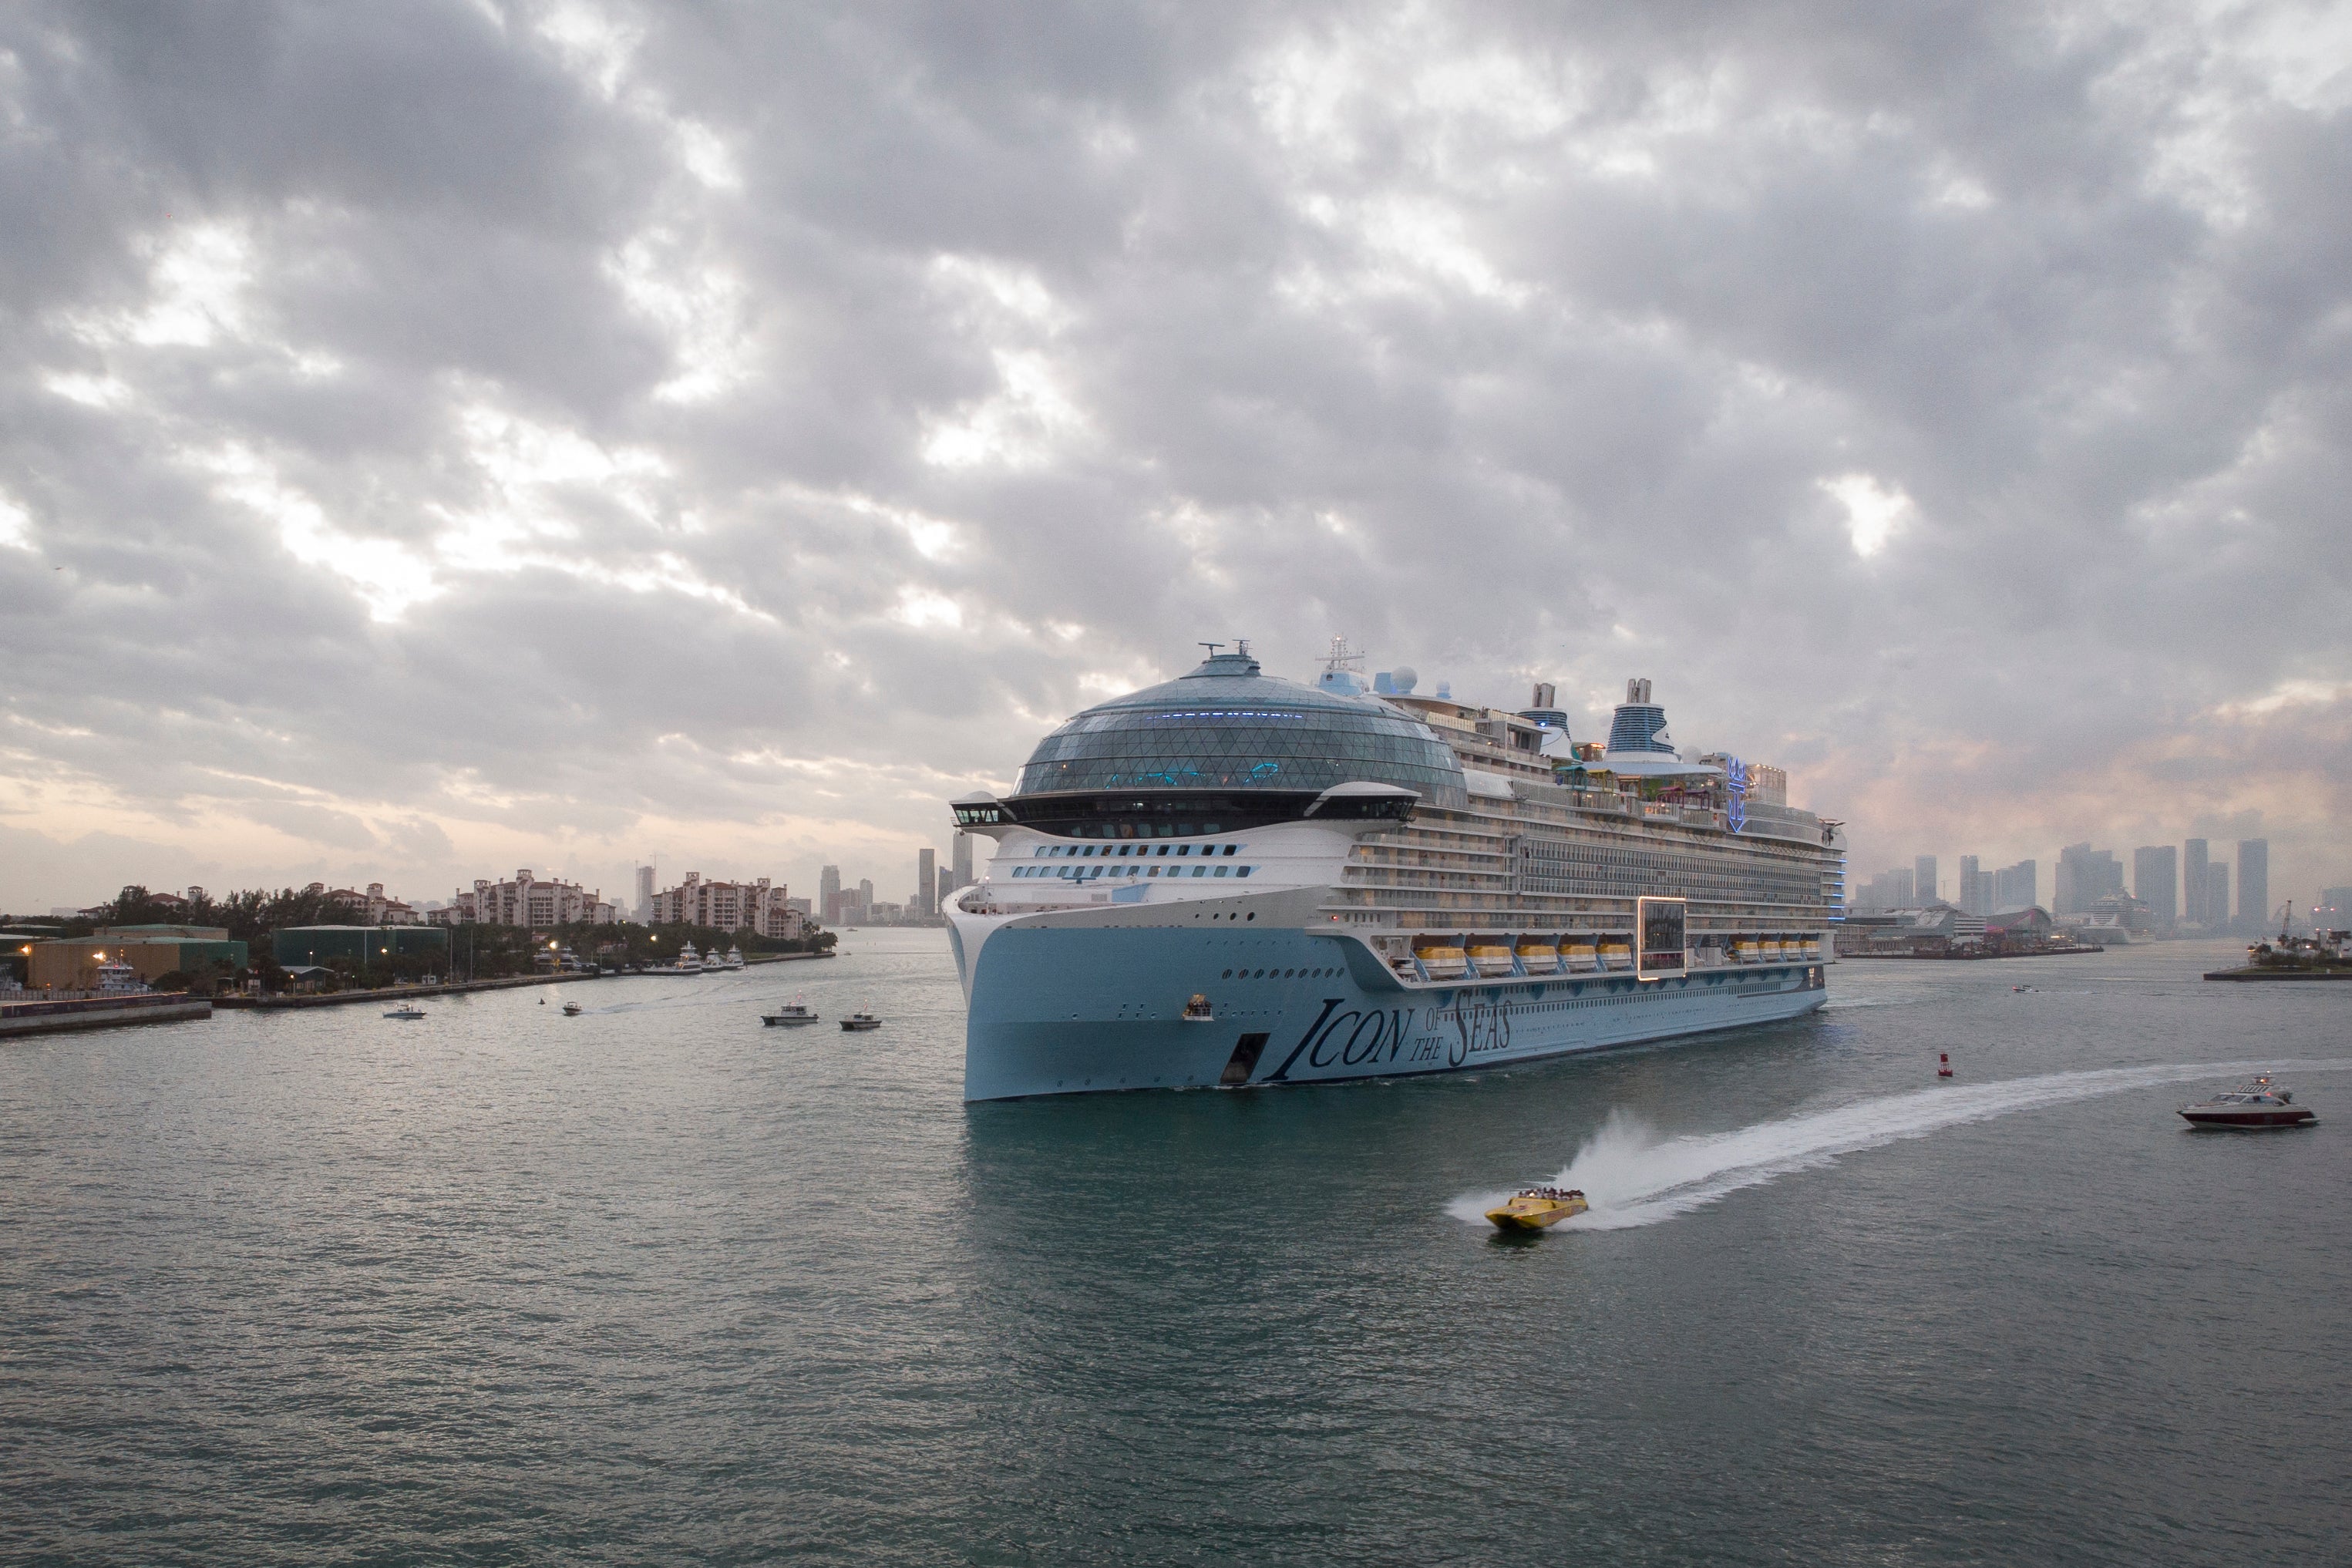 The incident occurred on the Icon of the Seas, a 1,196ft-long and 20-deck high cruise ship,